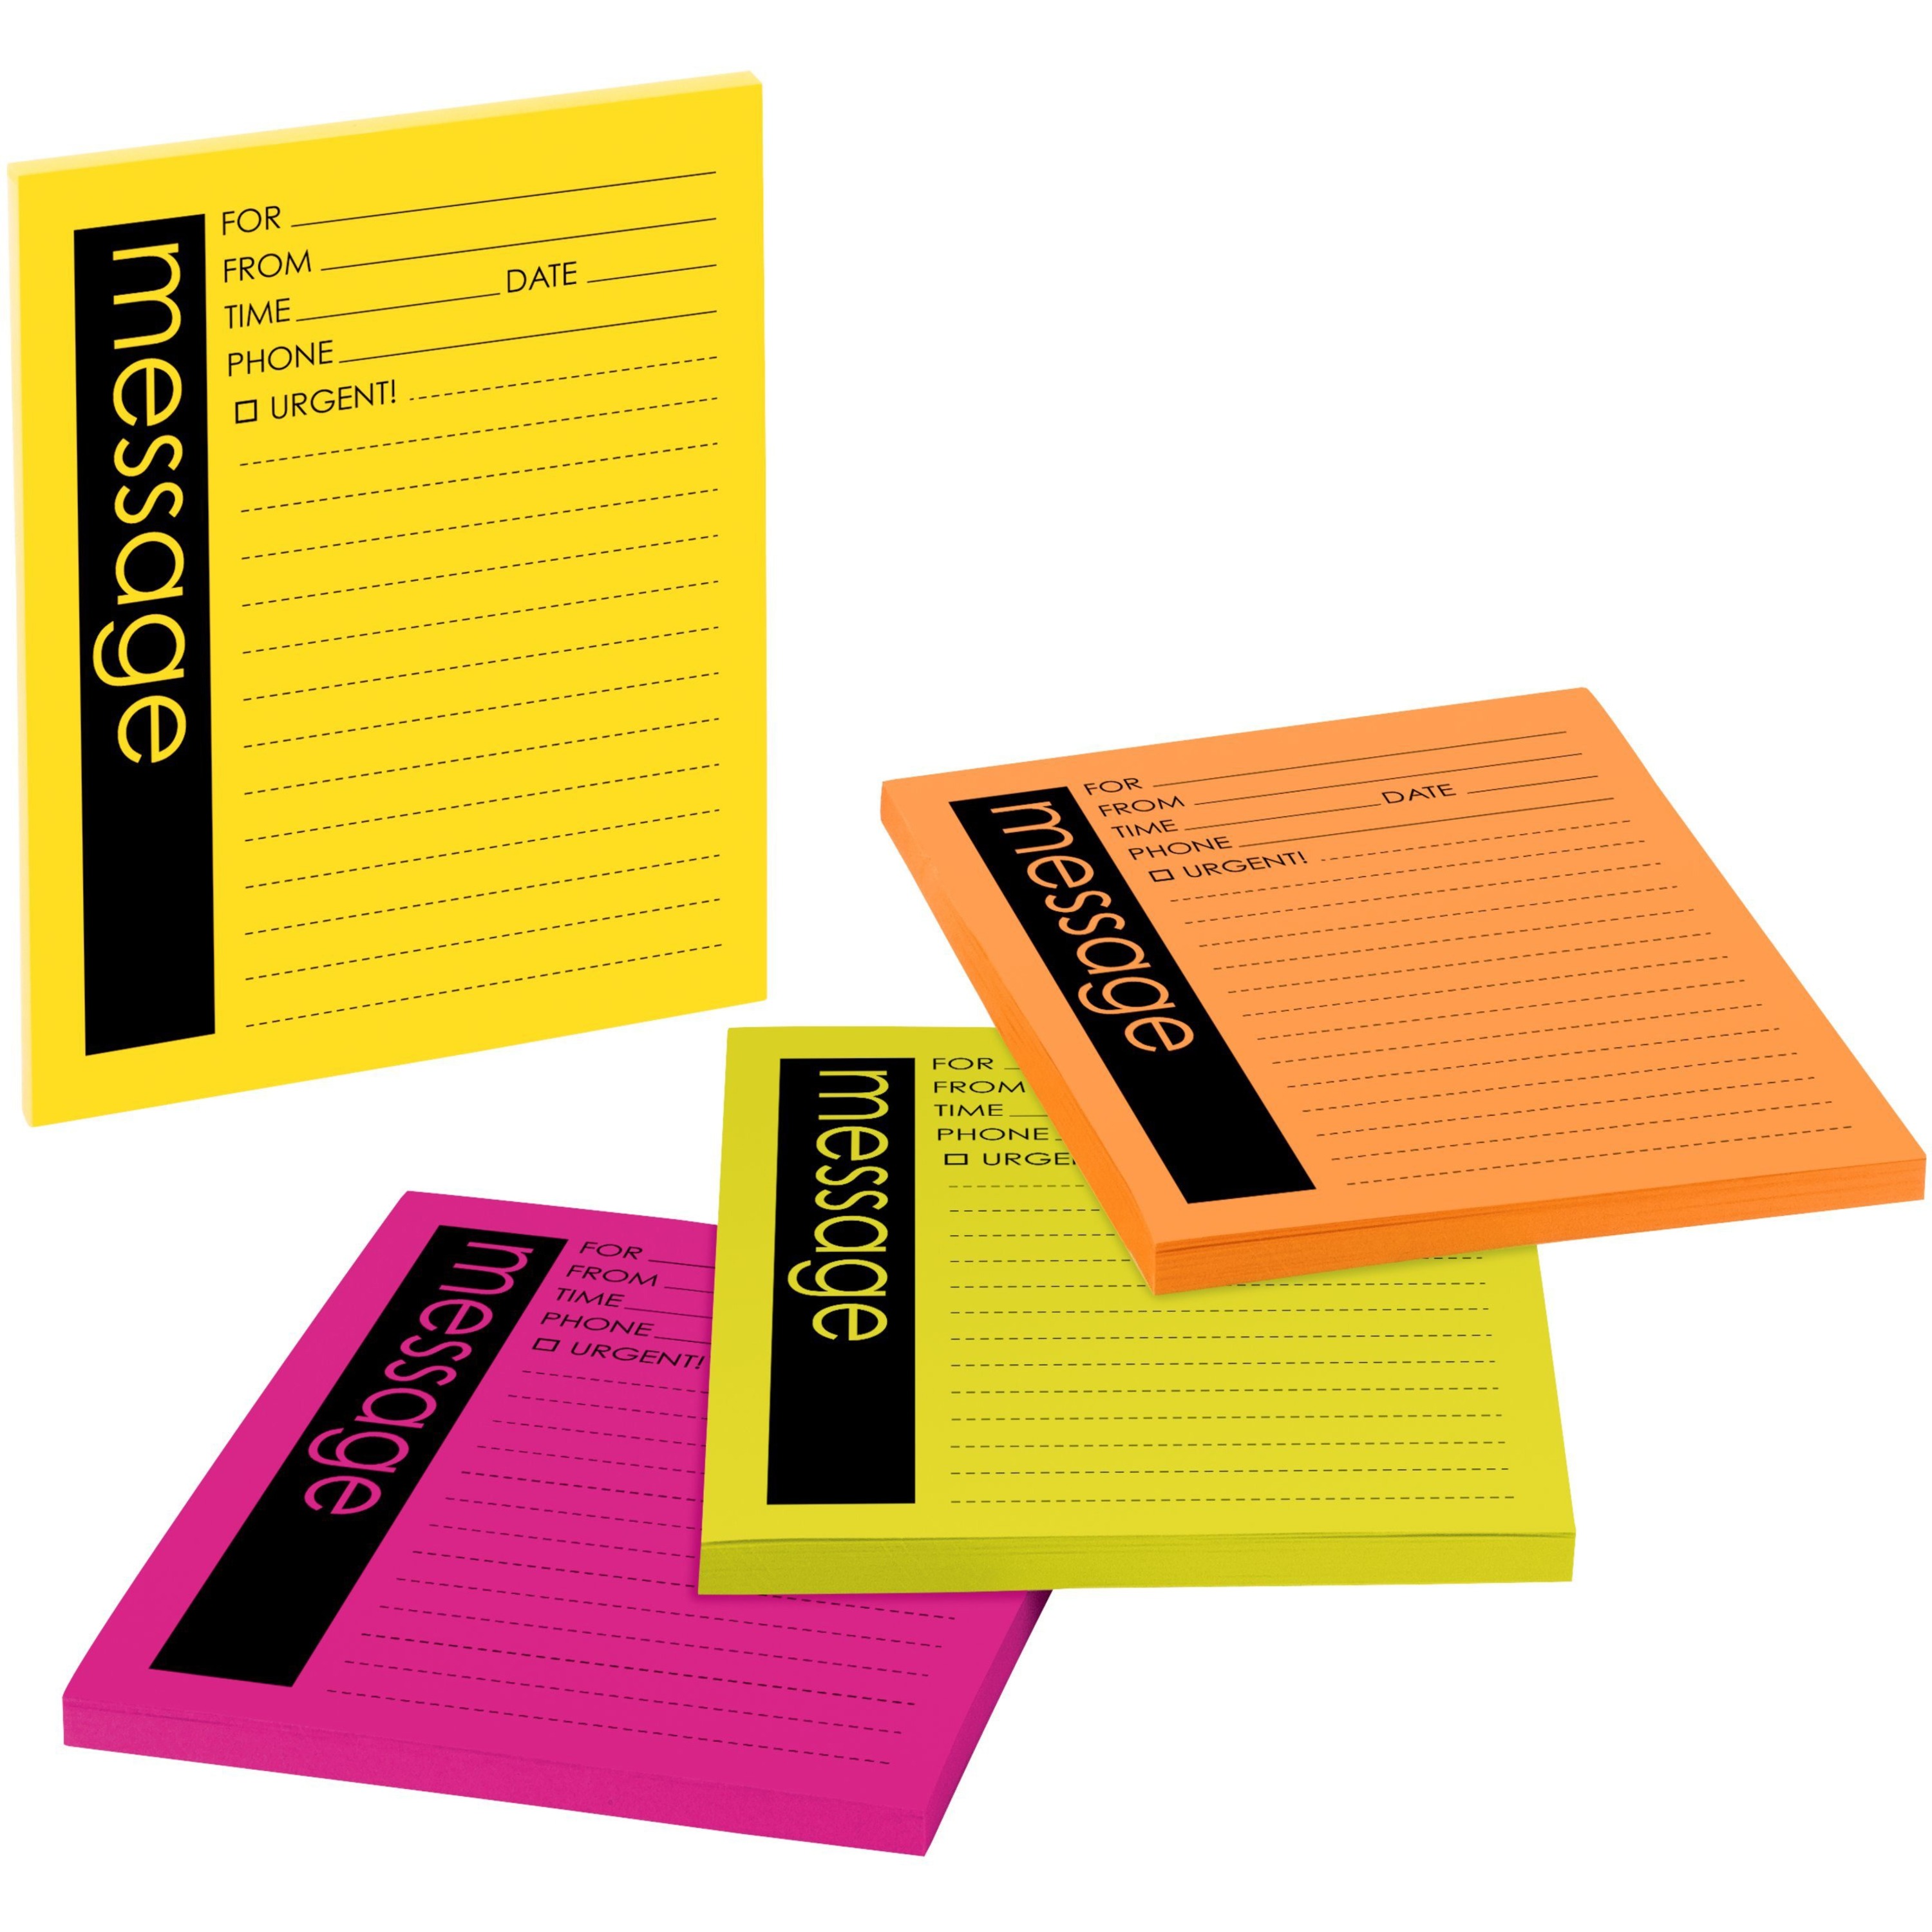 Office Depot Brand Sticky Notes With Storage Tray 3 x 3 Assorted Neon  Colors 100 Sheets Per Pad Pack Of 24 Pads - Office Depot